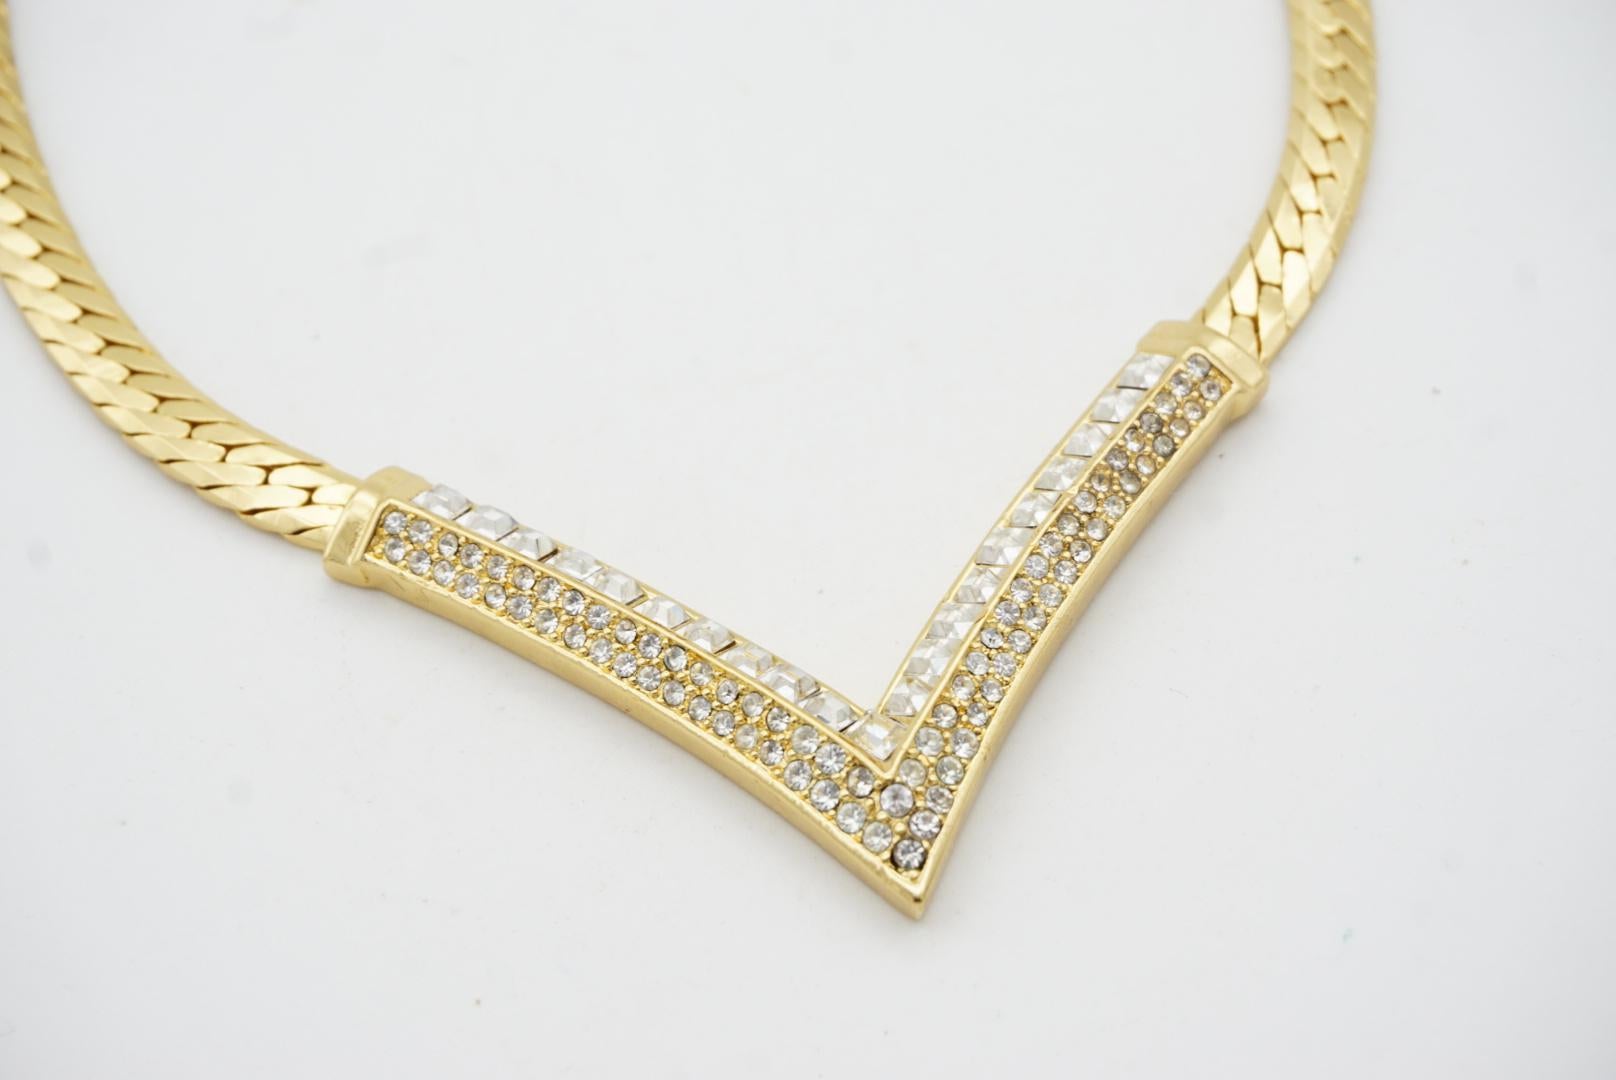 Christian Dior Vintage 1980s Large Triangle Square Crystals Pendant Necklace For Sale 3